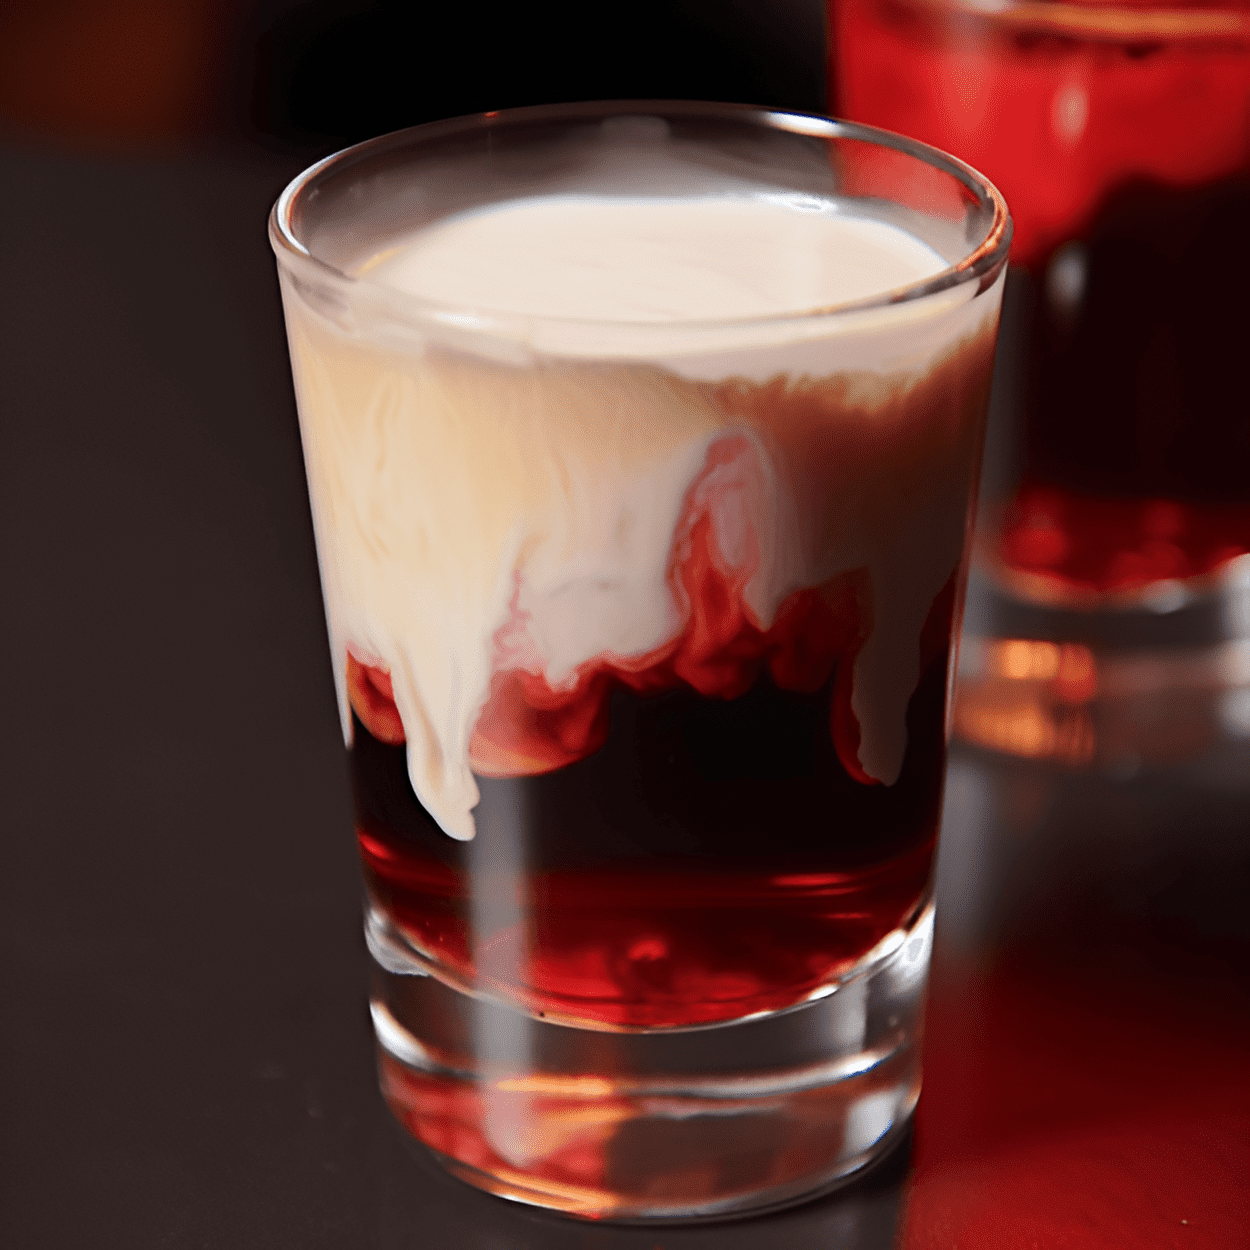 Abortion Cocktail Recipe - The Abortion Cocktail has a strong, sweet, and creamy taste. The combination of Bailey's Irish Cream and Grenadine gives it a unique flavor profile that is both rich and fruity.